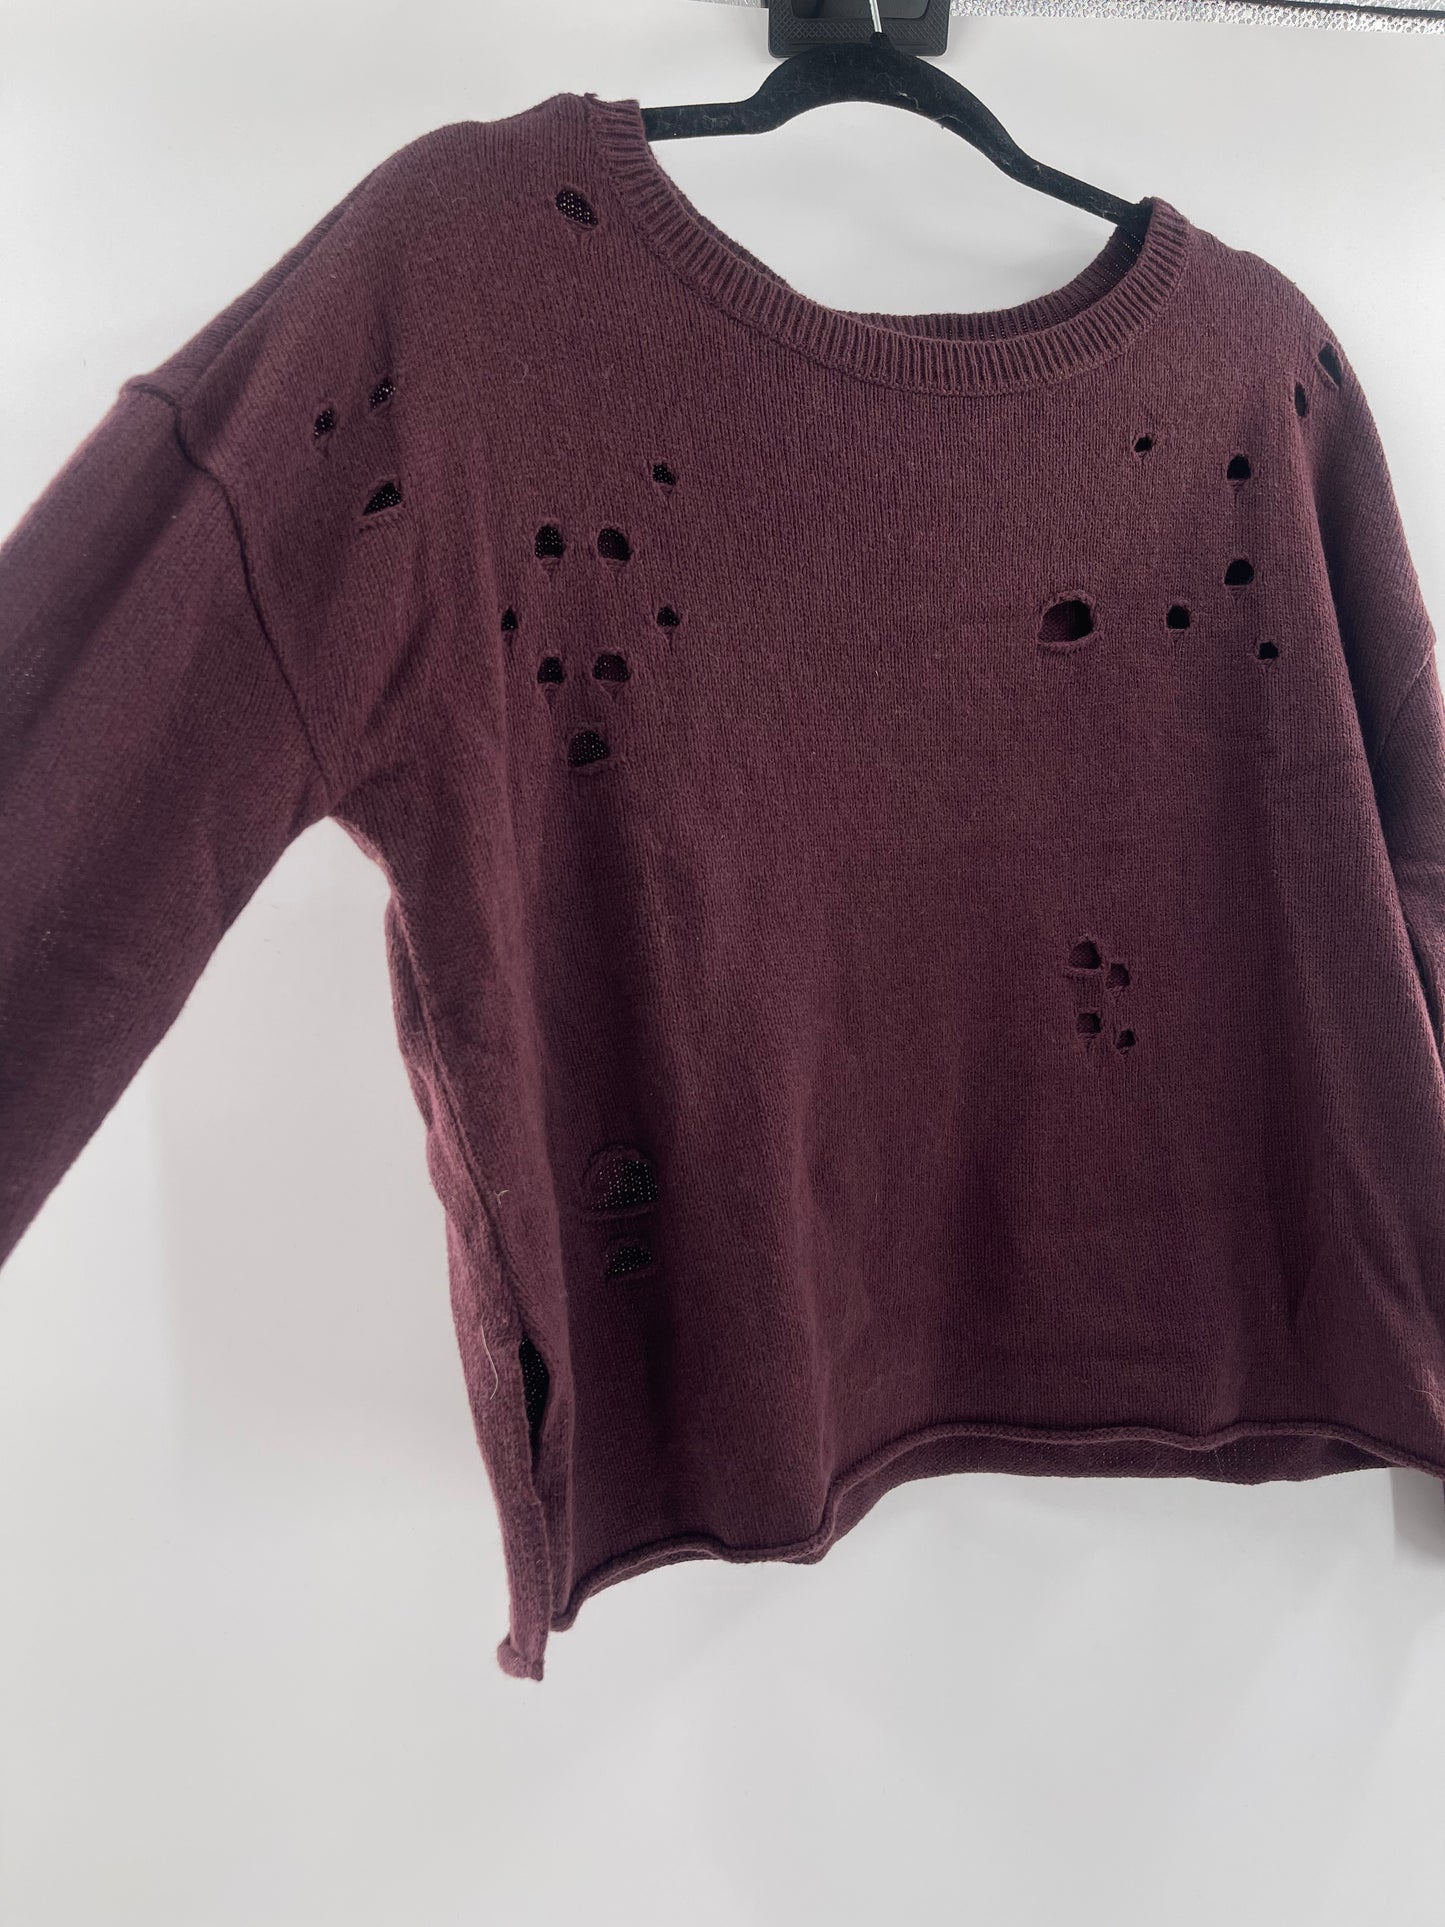 Urban Outfitters Distressed Burgundy Sweater (Small)